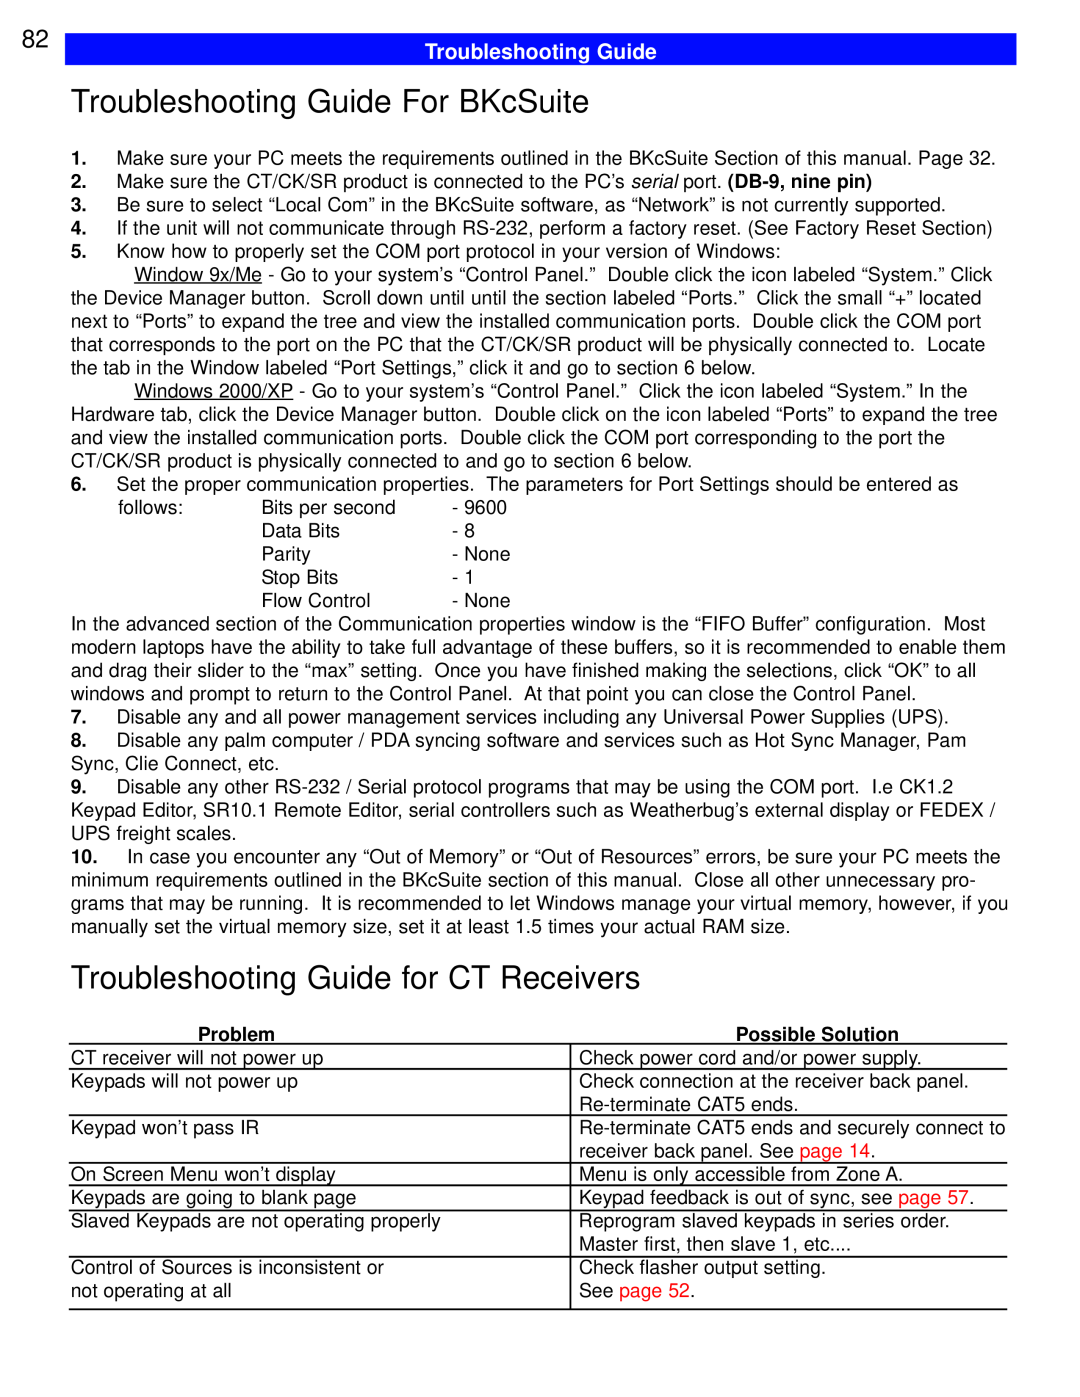 B&K CT602 Troubleshooting Guide For BKcSuite, Troubleshooting Guide for CT Receivers, Problem, Possible Solution, See page 